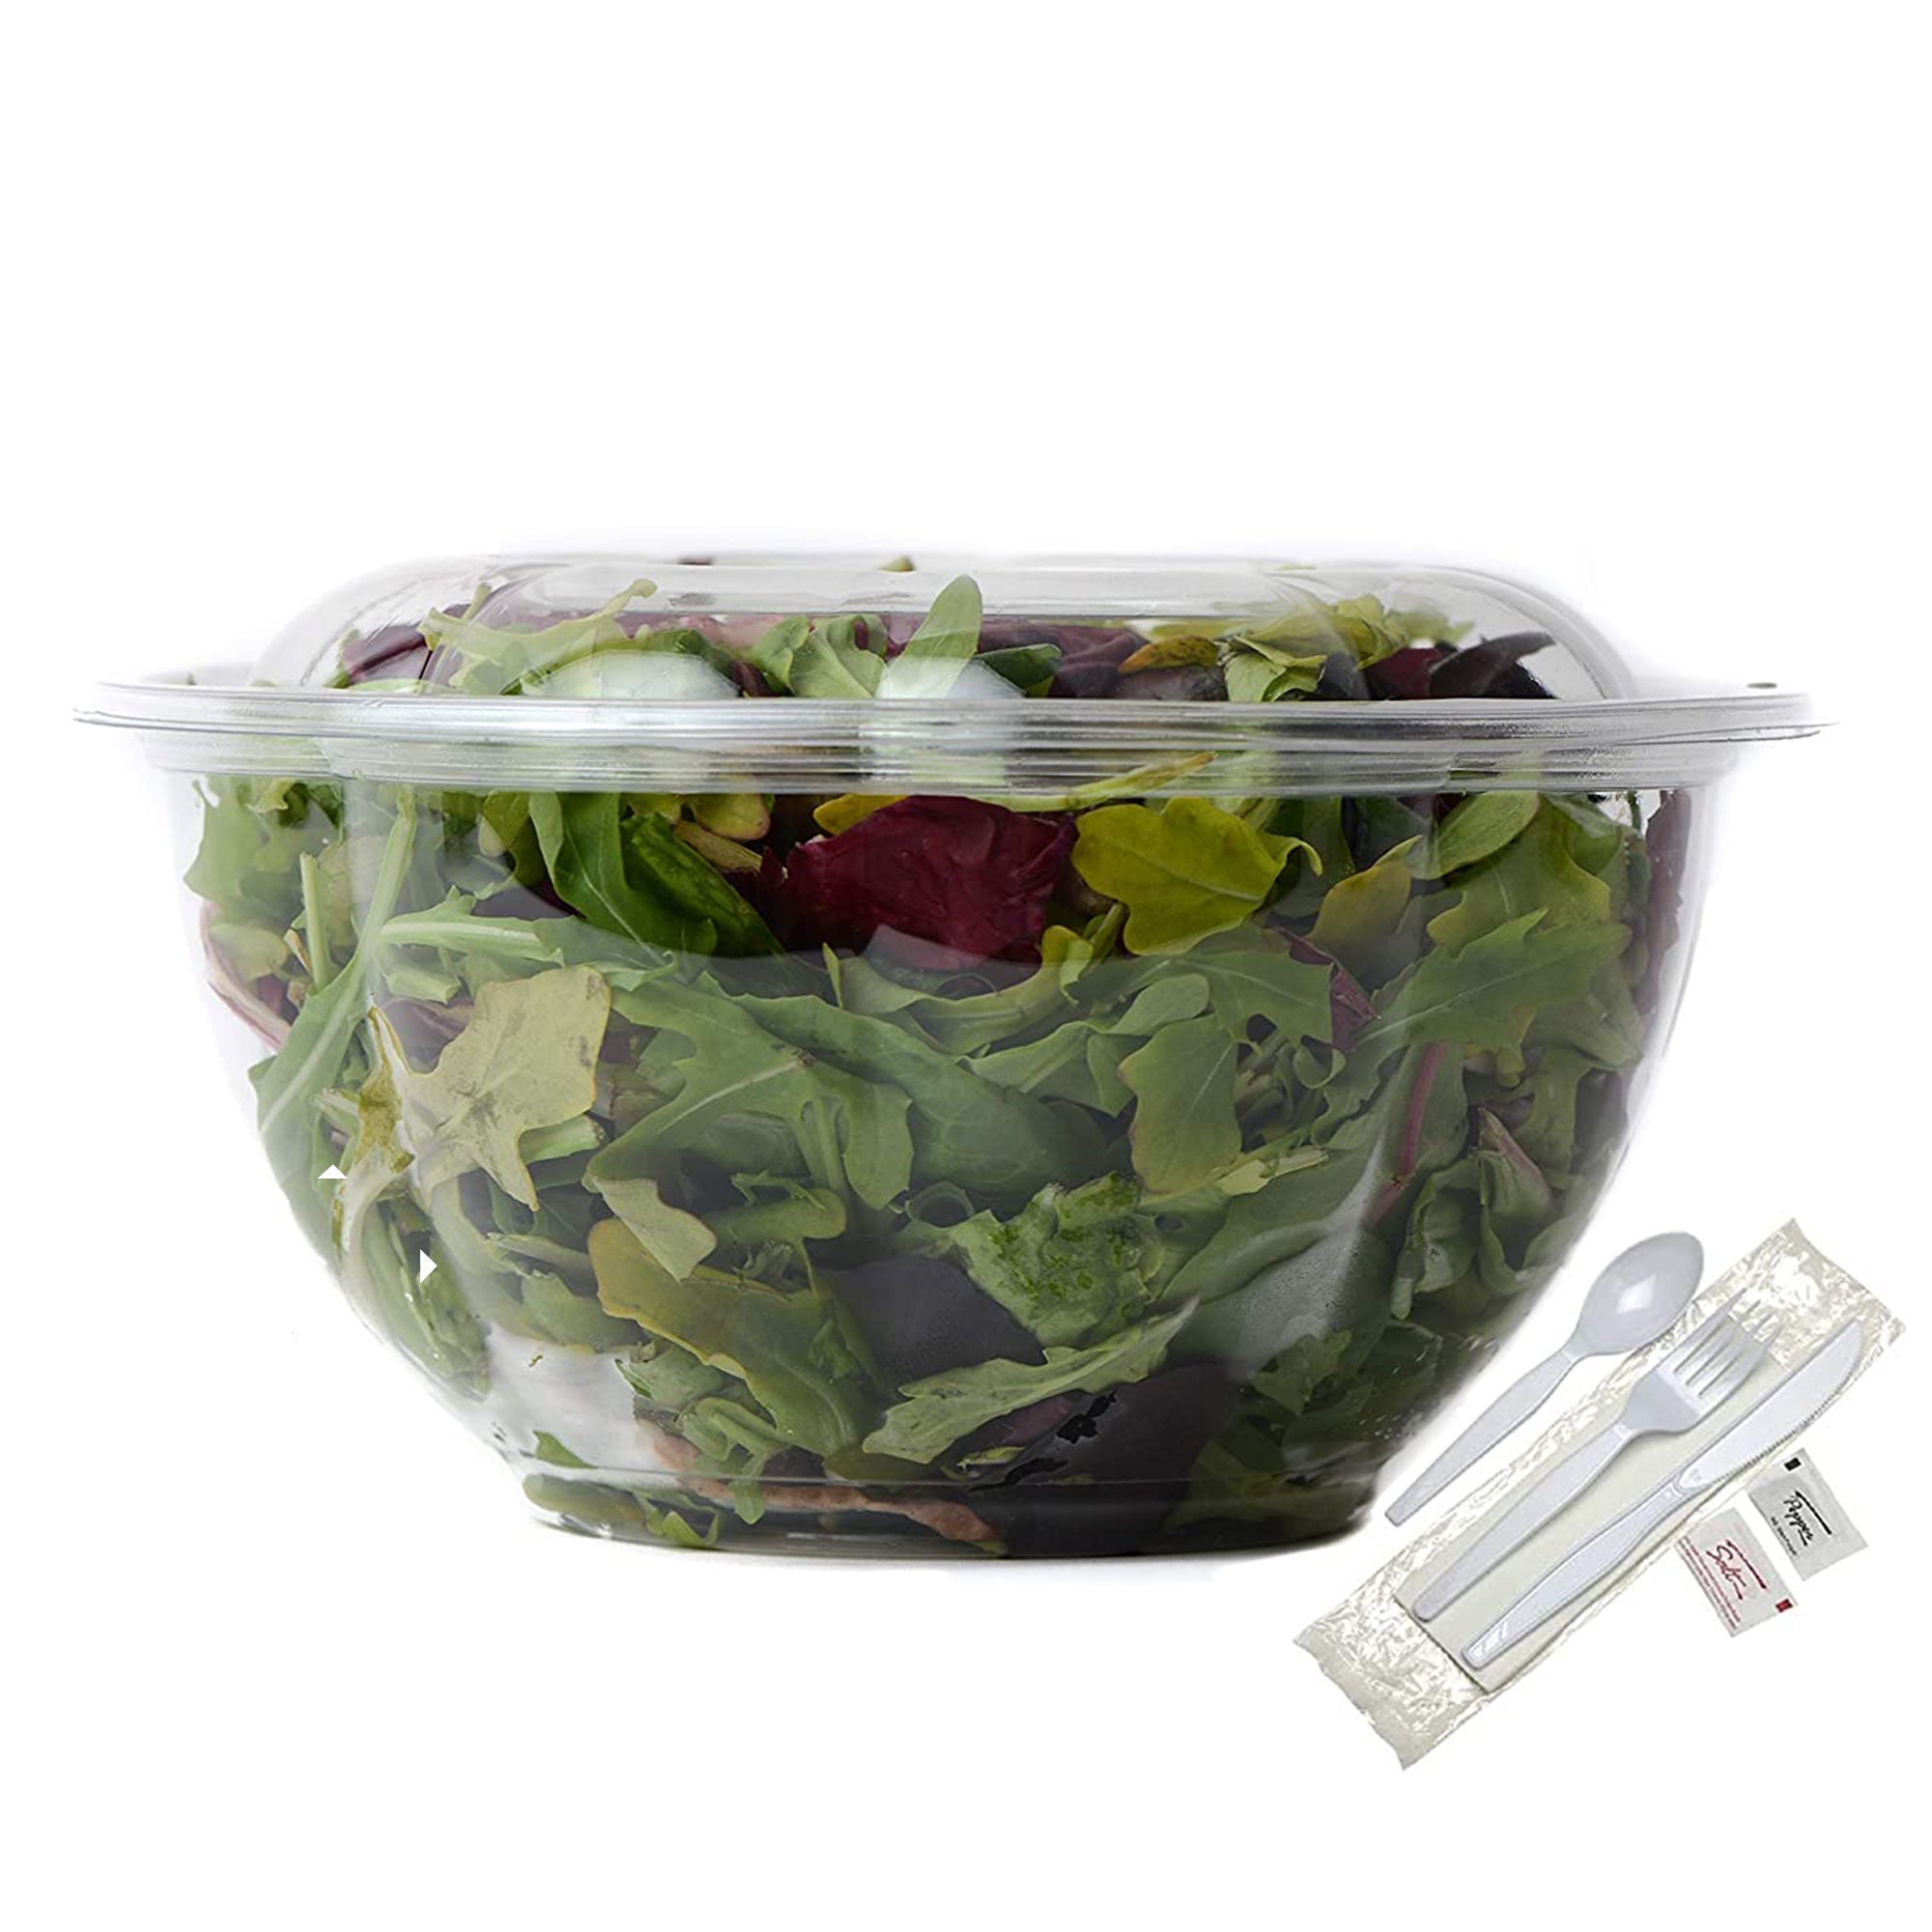 24 oz Salad To-Go Containers - Clear Plastic Disposable Salad  Containers/Bowls with Airtight Lids